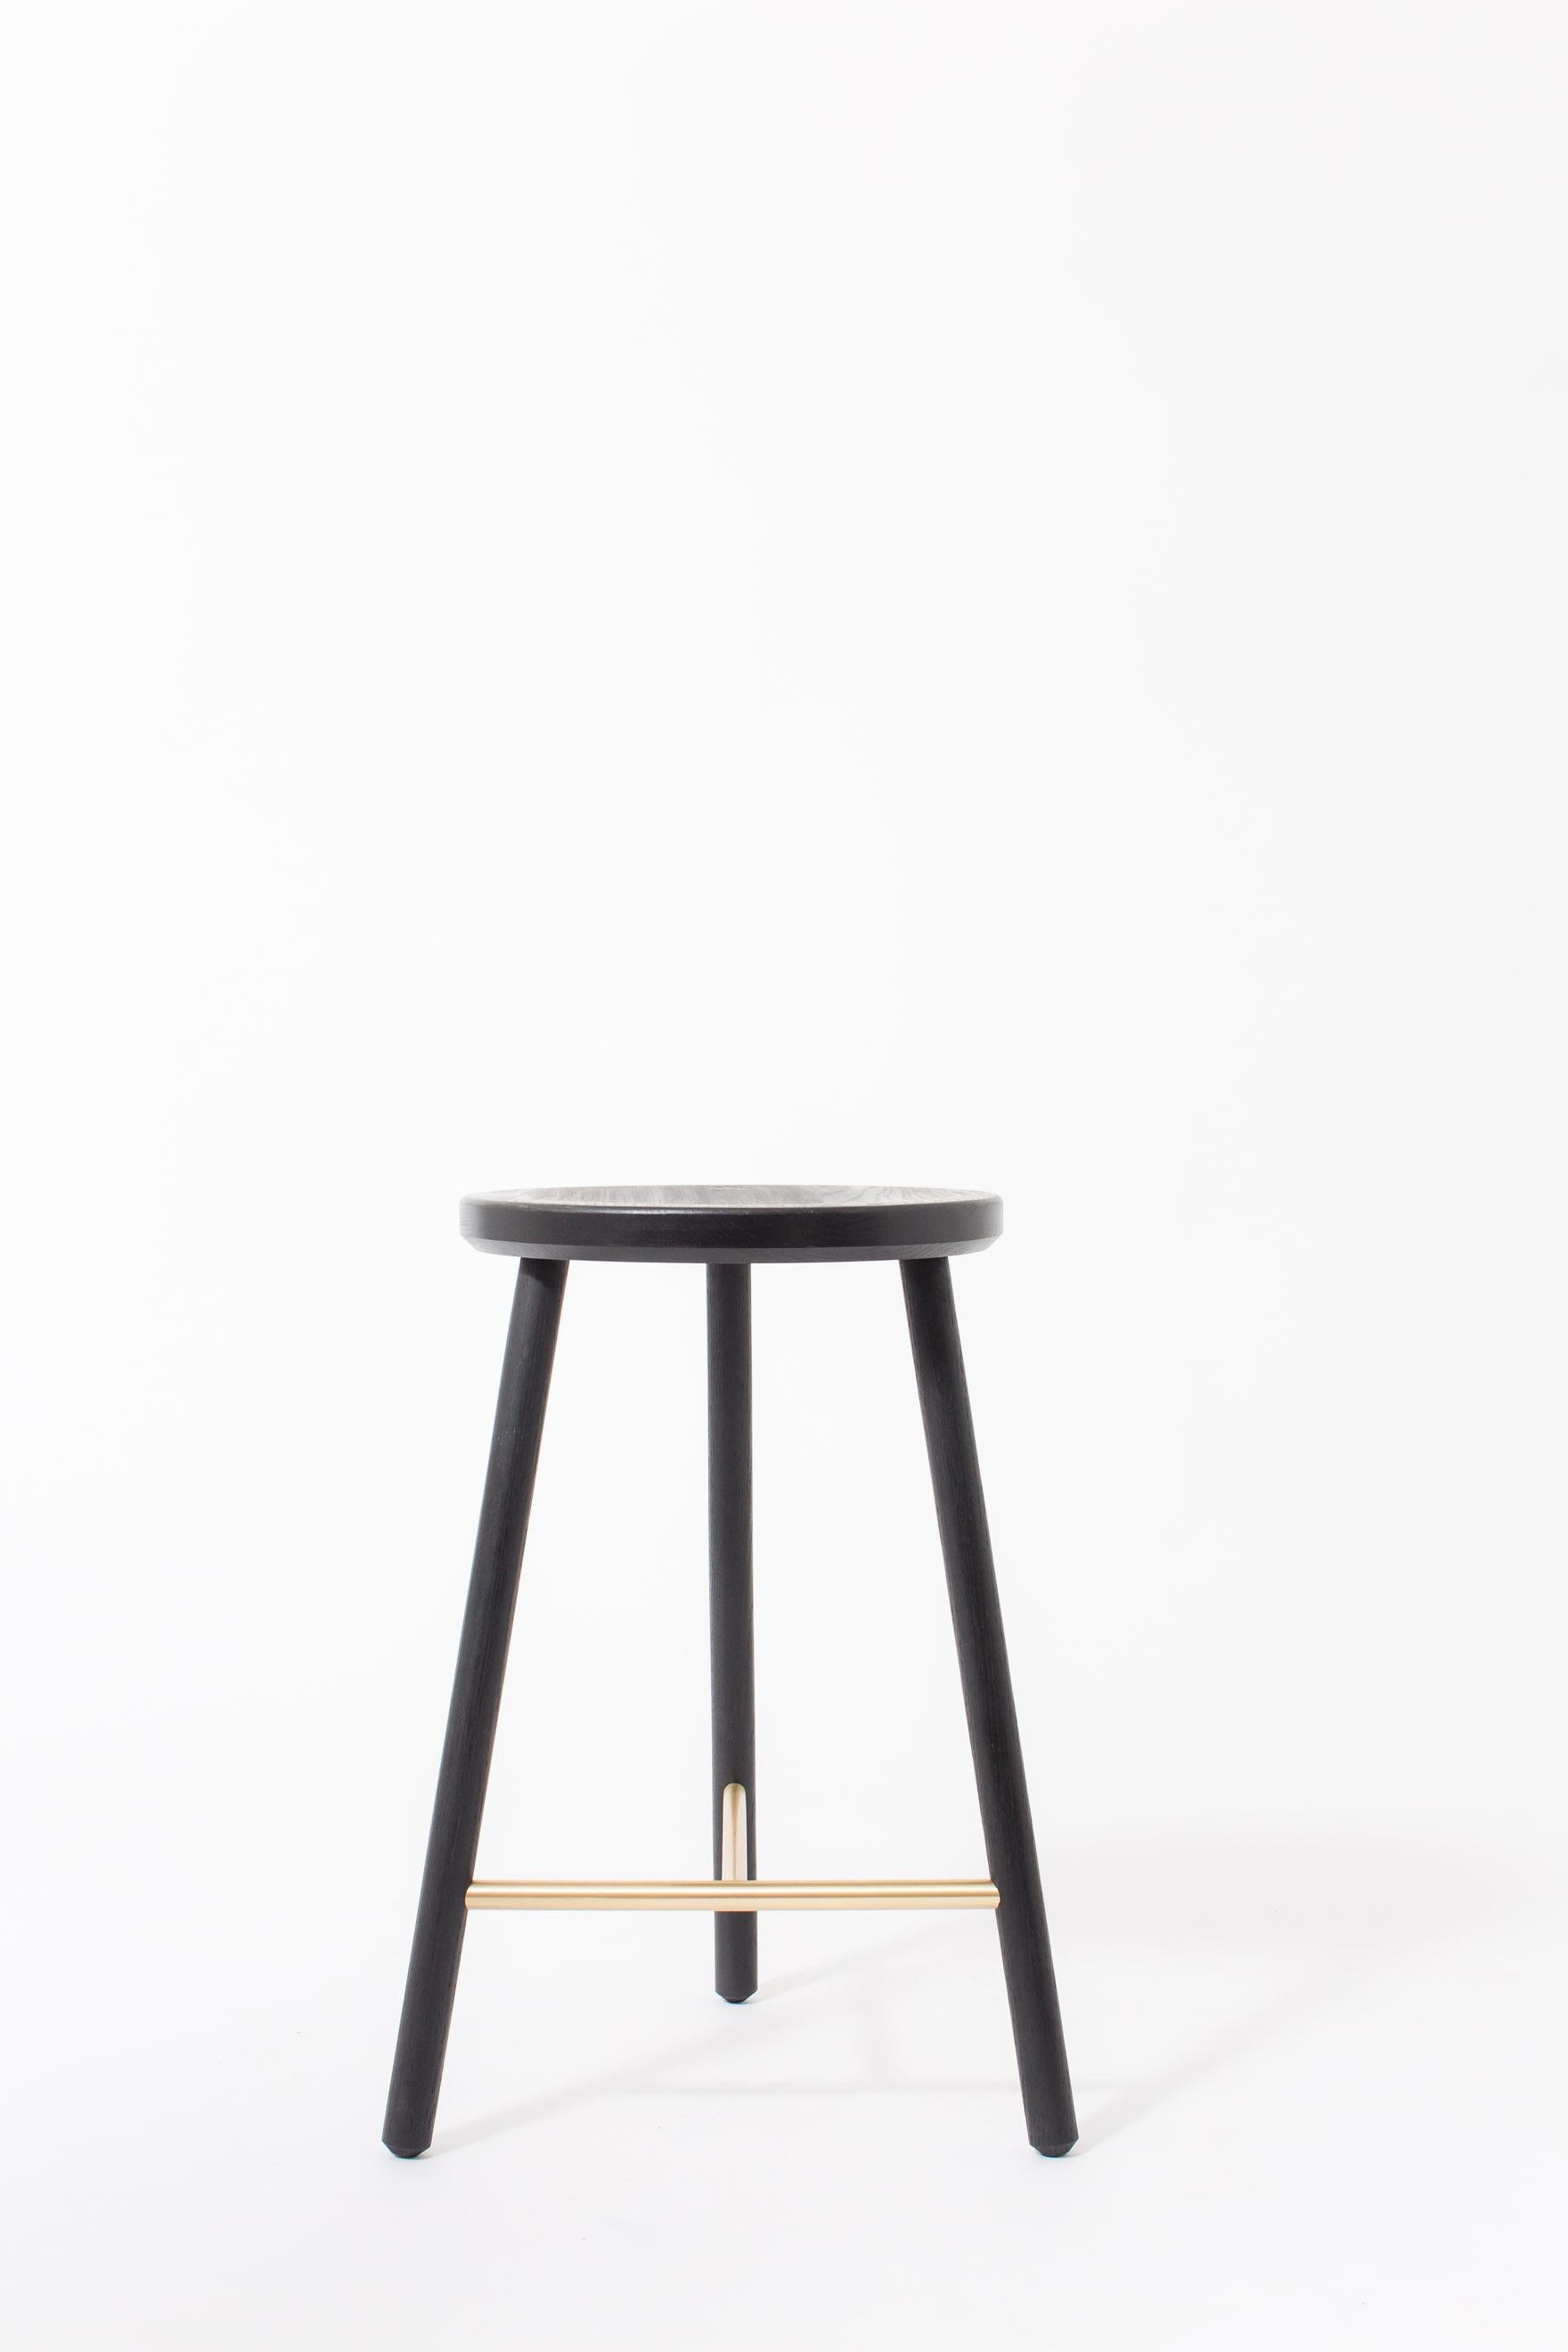 The scout stool has a slim design, allowing it to be tucked into small spaces with a minimal footprint.

Shown in ebonized/blackened oak and satin brass. Domestic hardwood species available include white oak, walnut, maple or ash. Hand rubbed oil